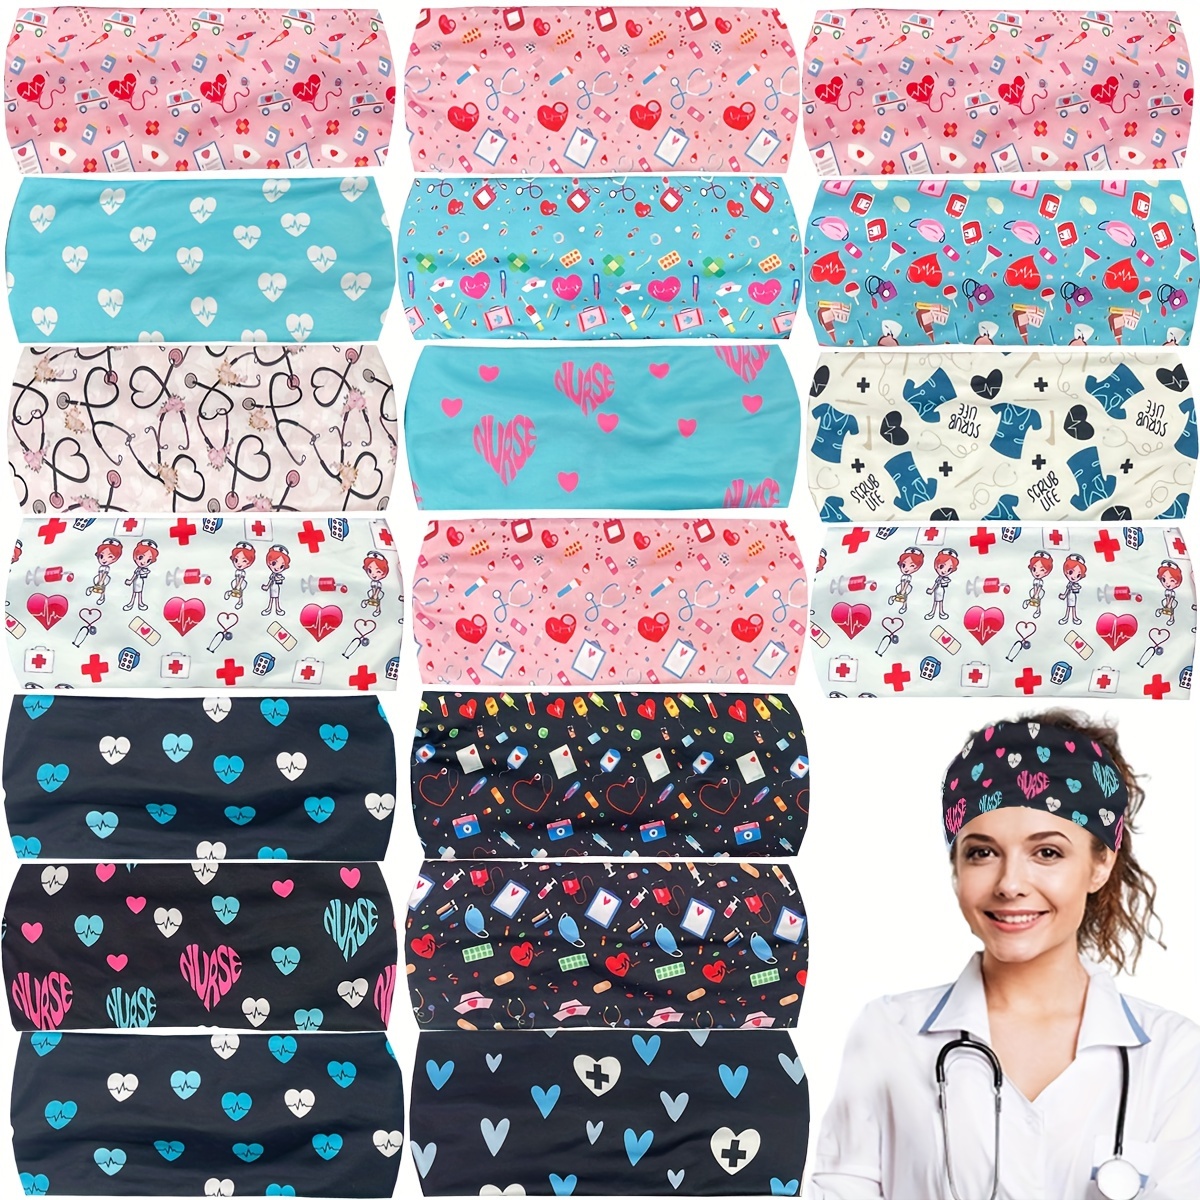 

3pcs International Nurse Day Series Head Bands Cartoon Heart Pattern Printed Elastic Hair Hoops For Women And Daily Use Wear